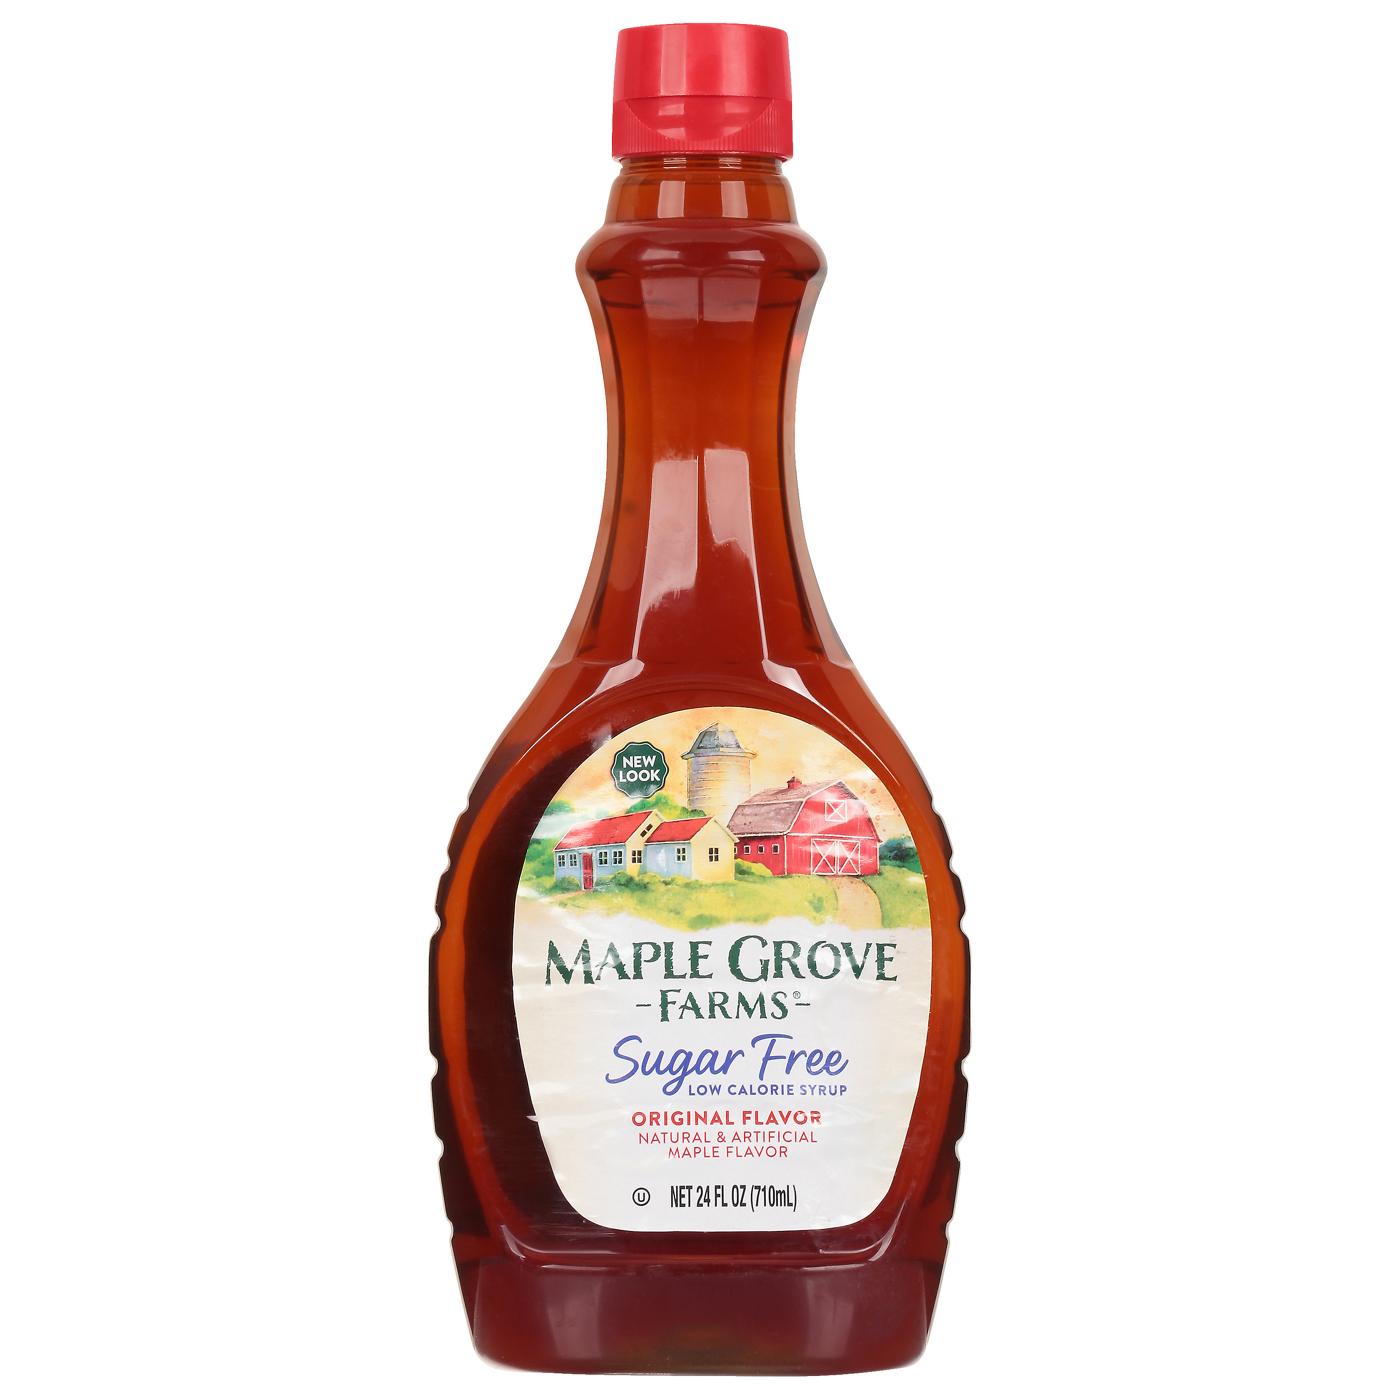 Maple Grove Farms Sugar Free Maple Flavor Syrup; image 1 of 2